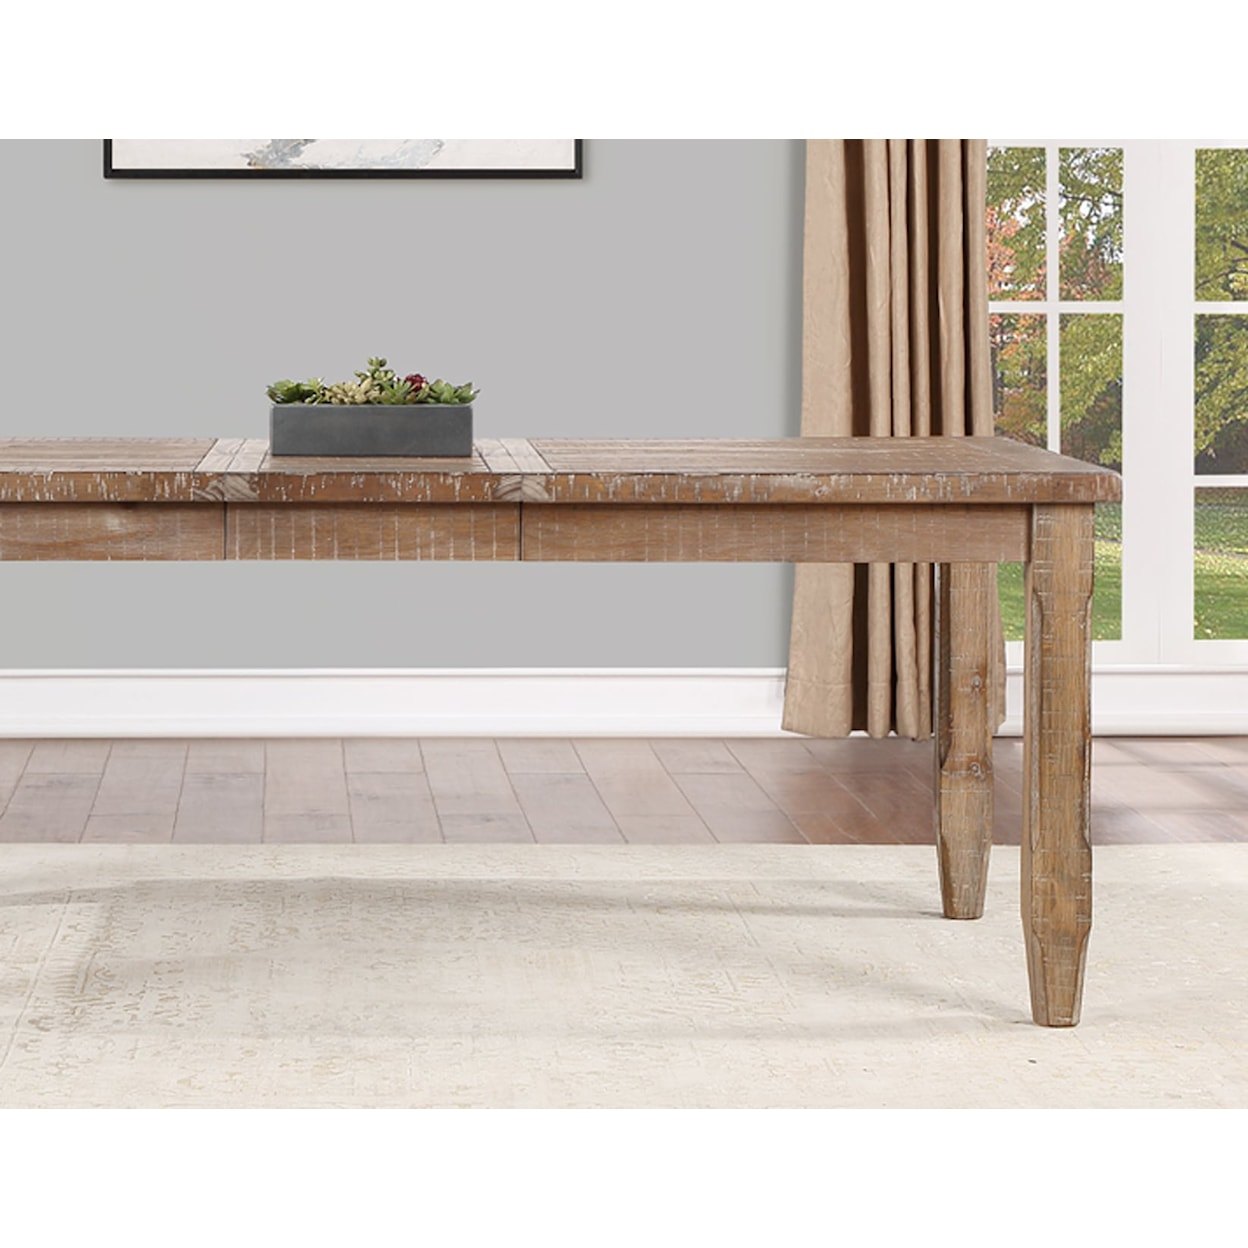 Prime Riverdale Dining Table with 16-Inch Table Leaf